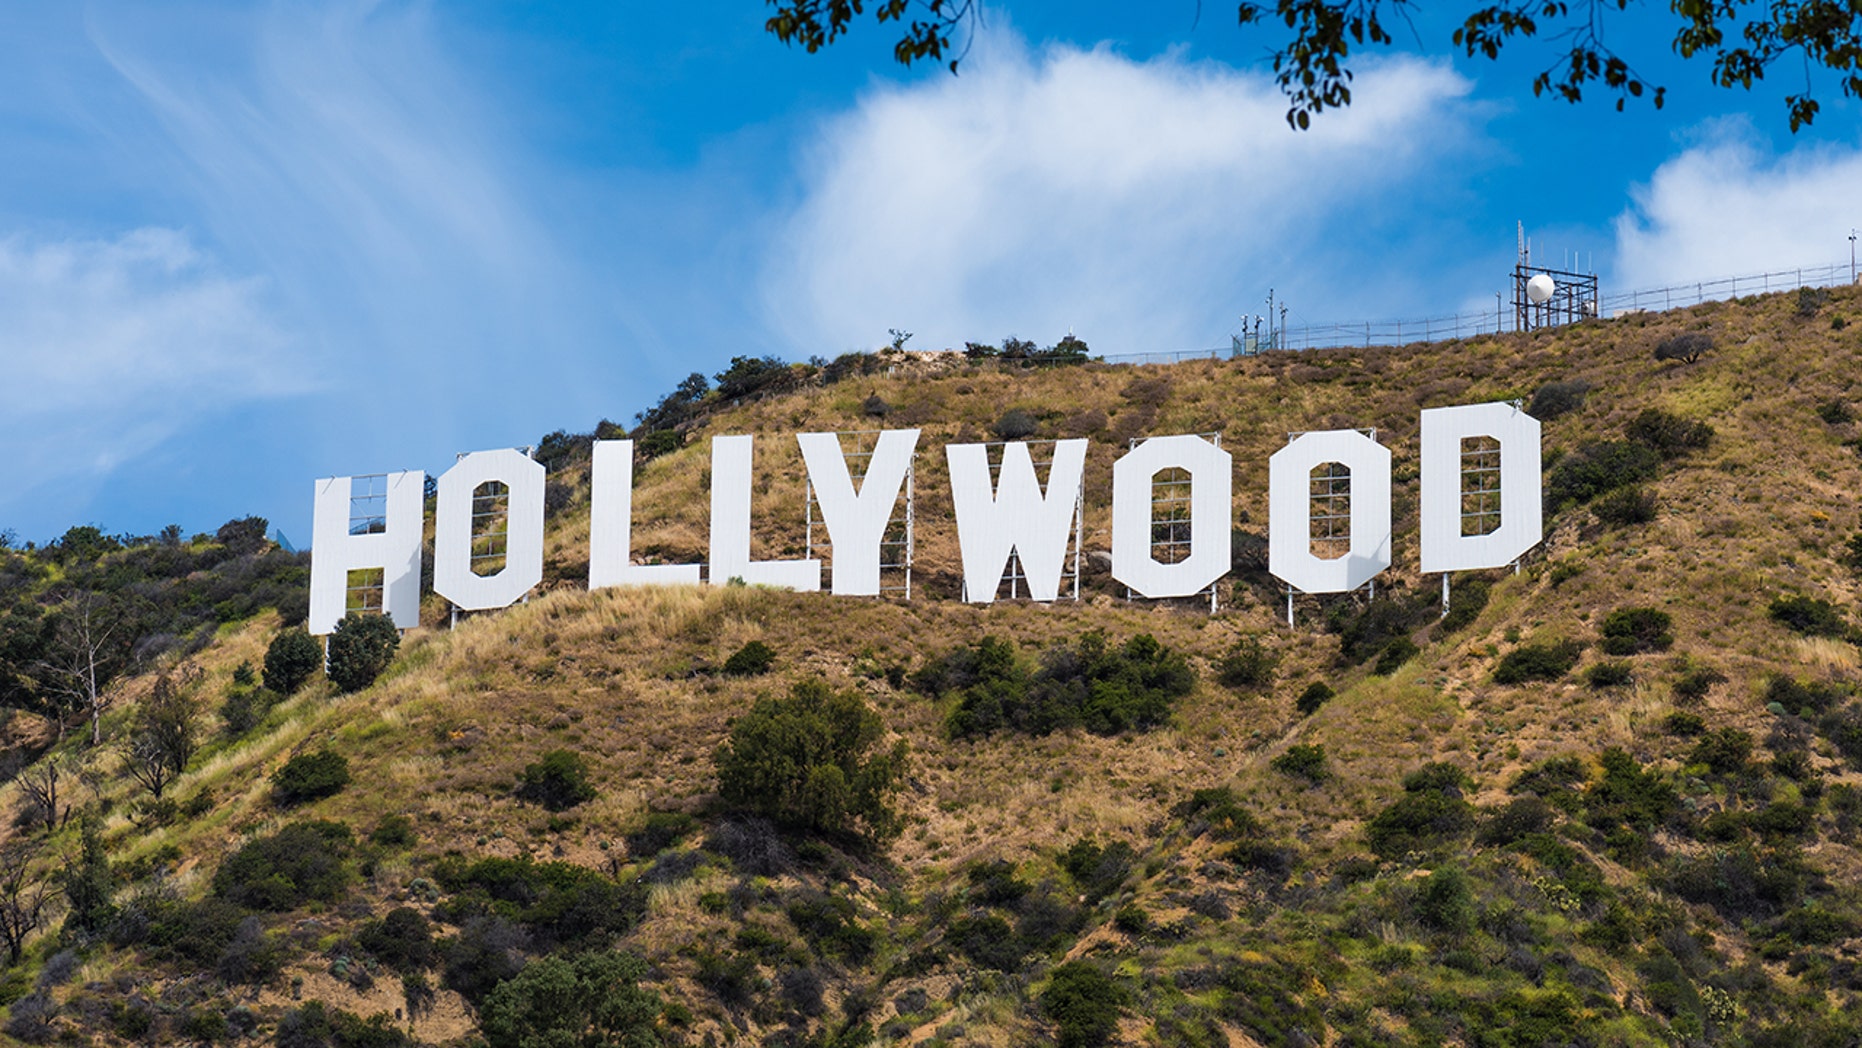 Warner Bros. proposes solution to Hollywood sign tourist traffic with